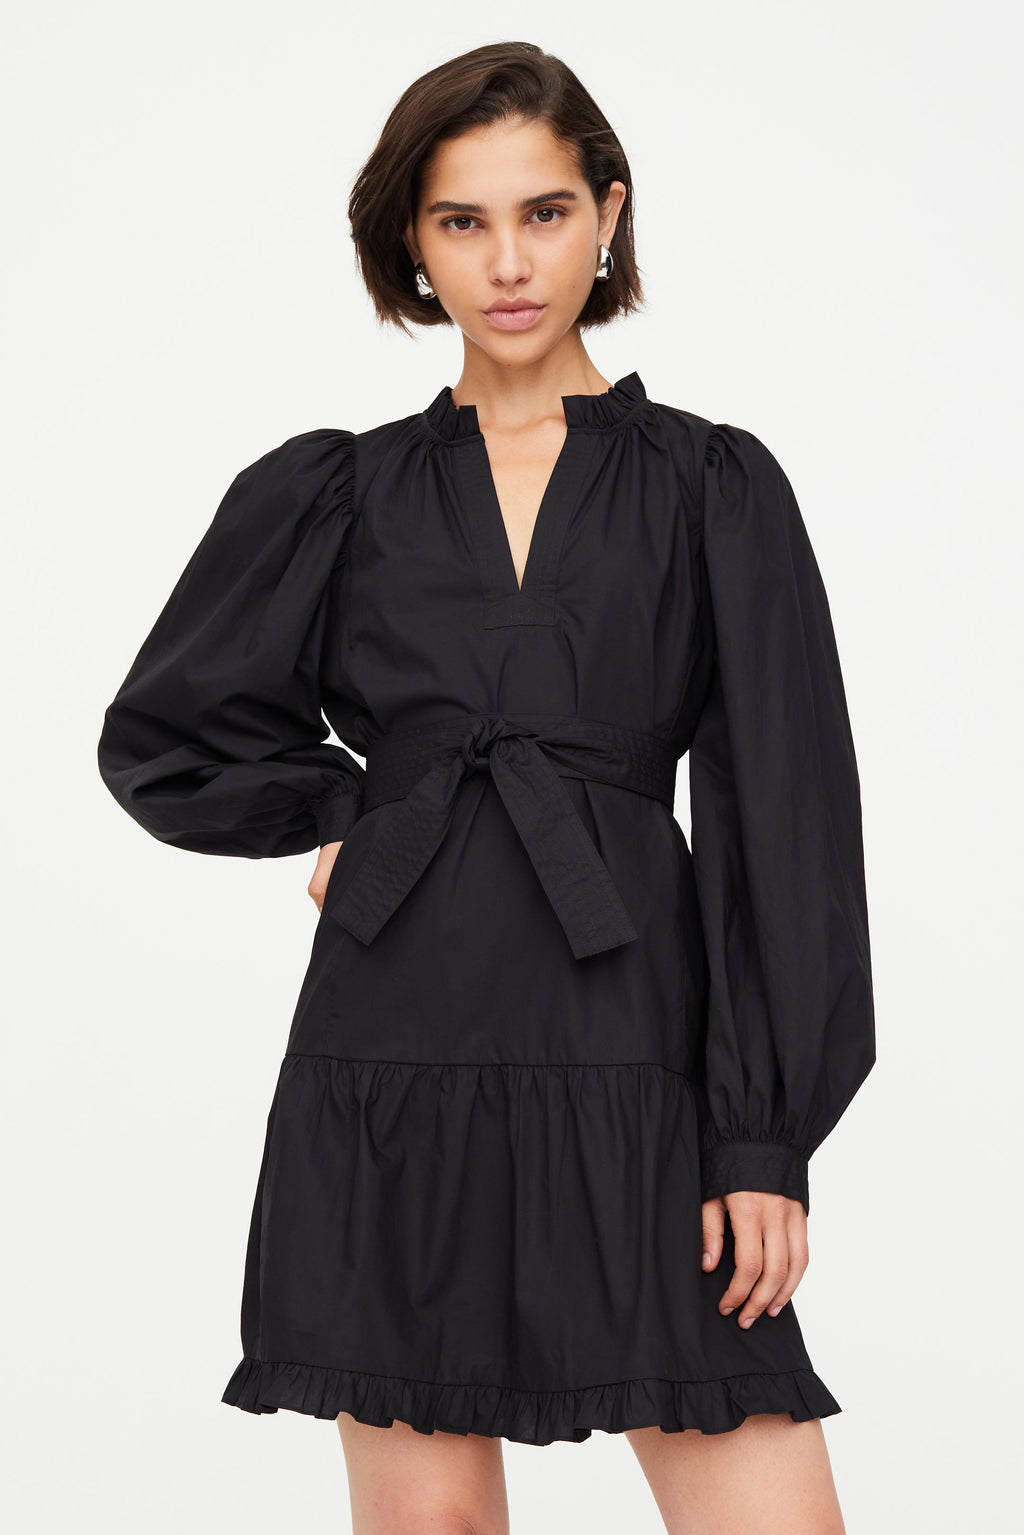 Solid black above the knee dress with long sleeves and v neckline 